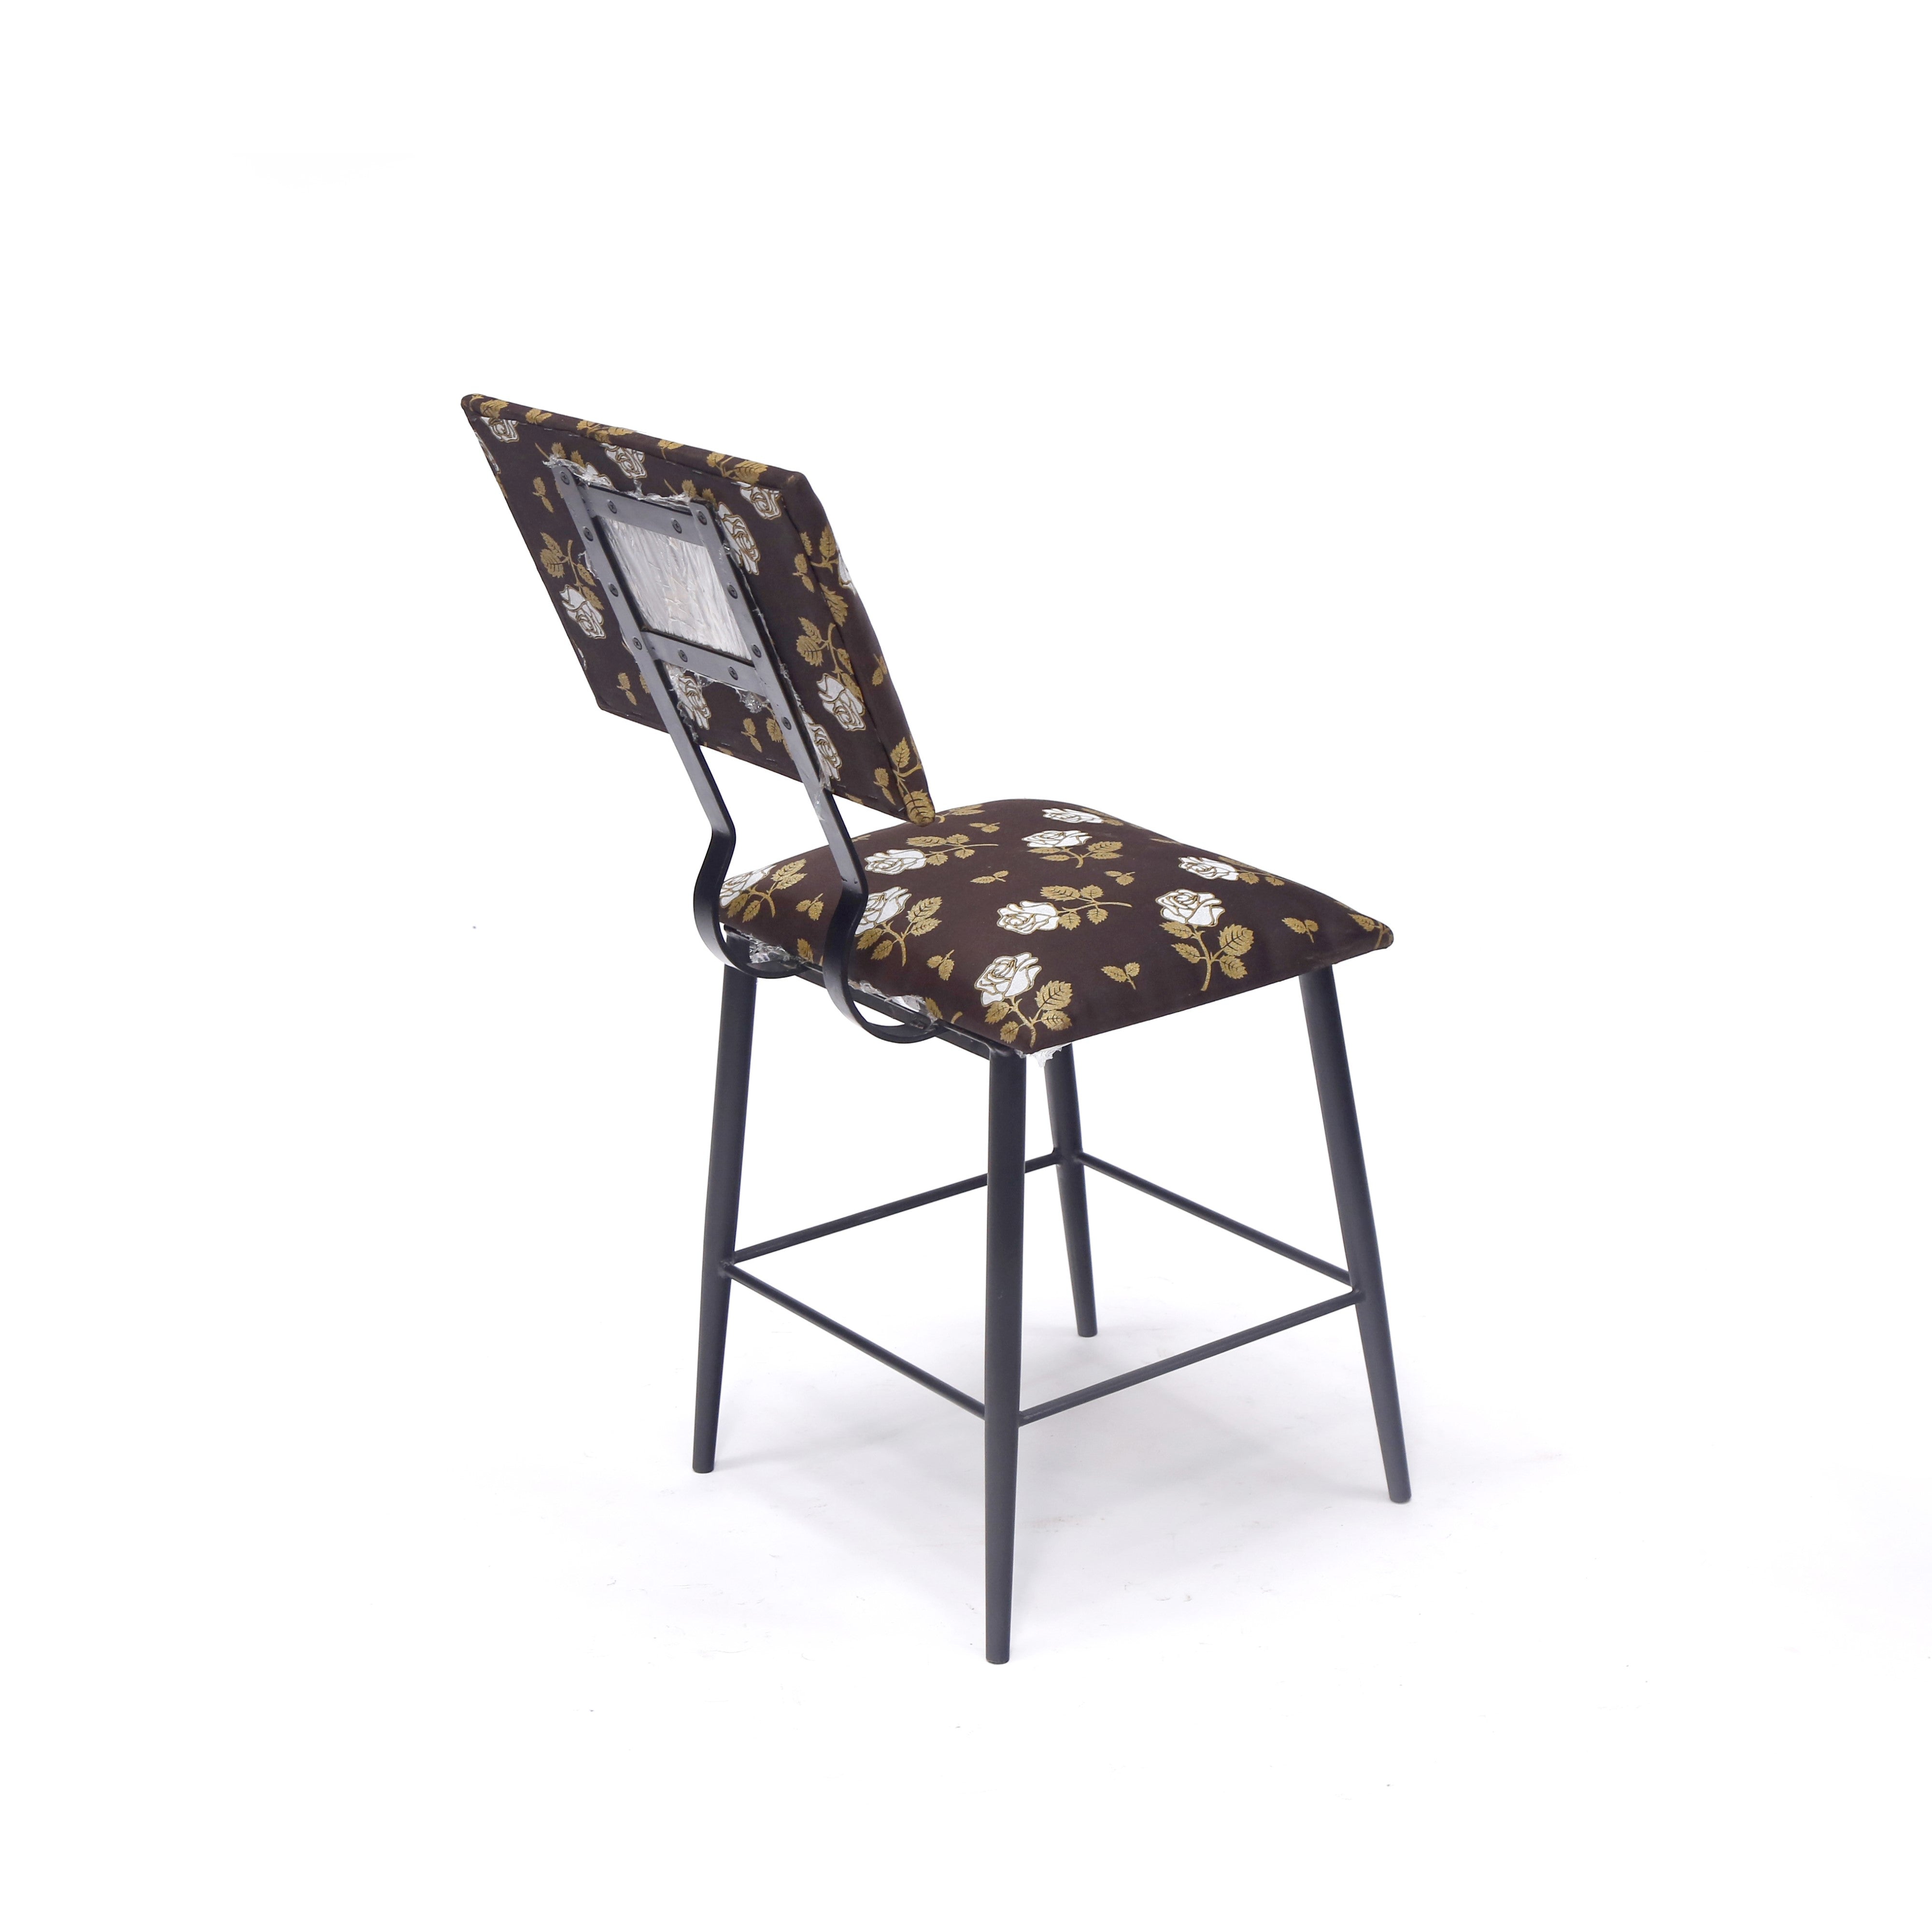 (Set of 2) Metal Upholstery Chair Dining Chair